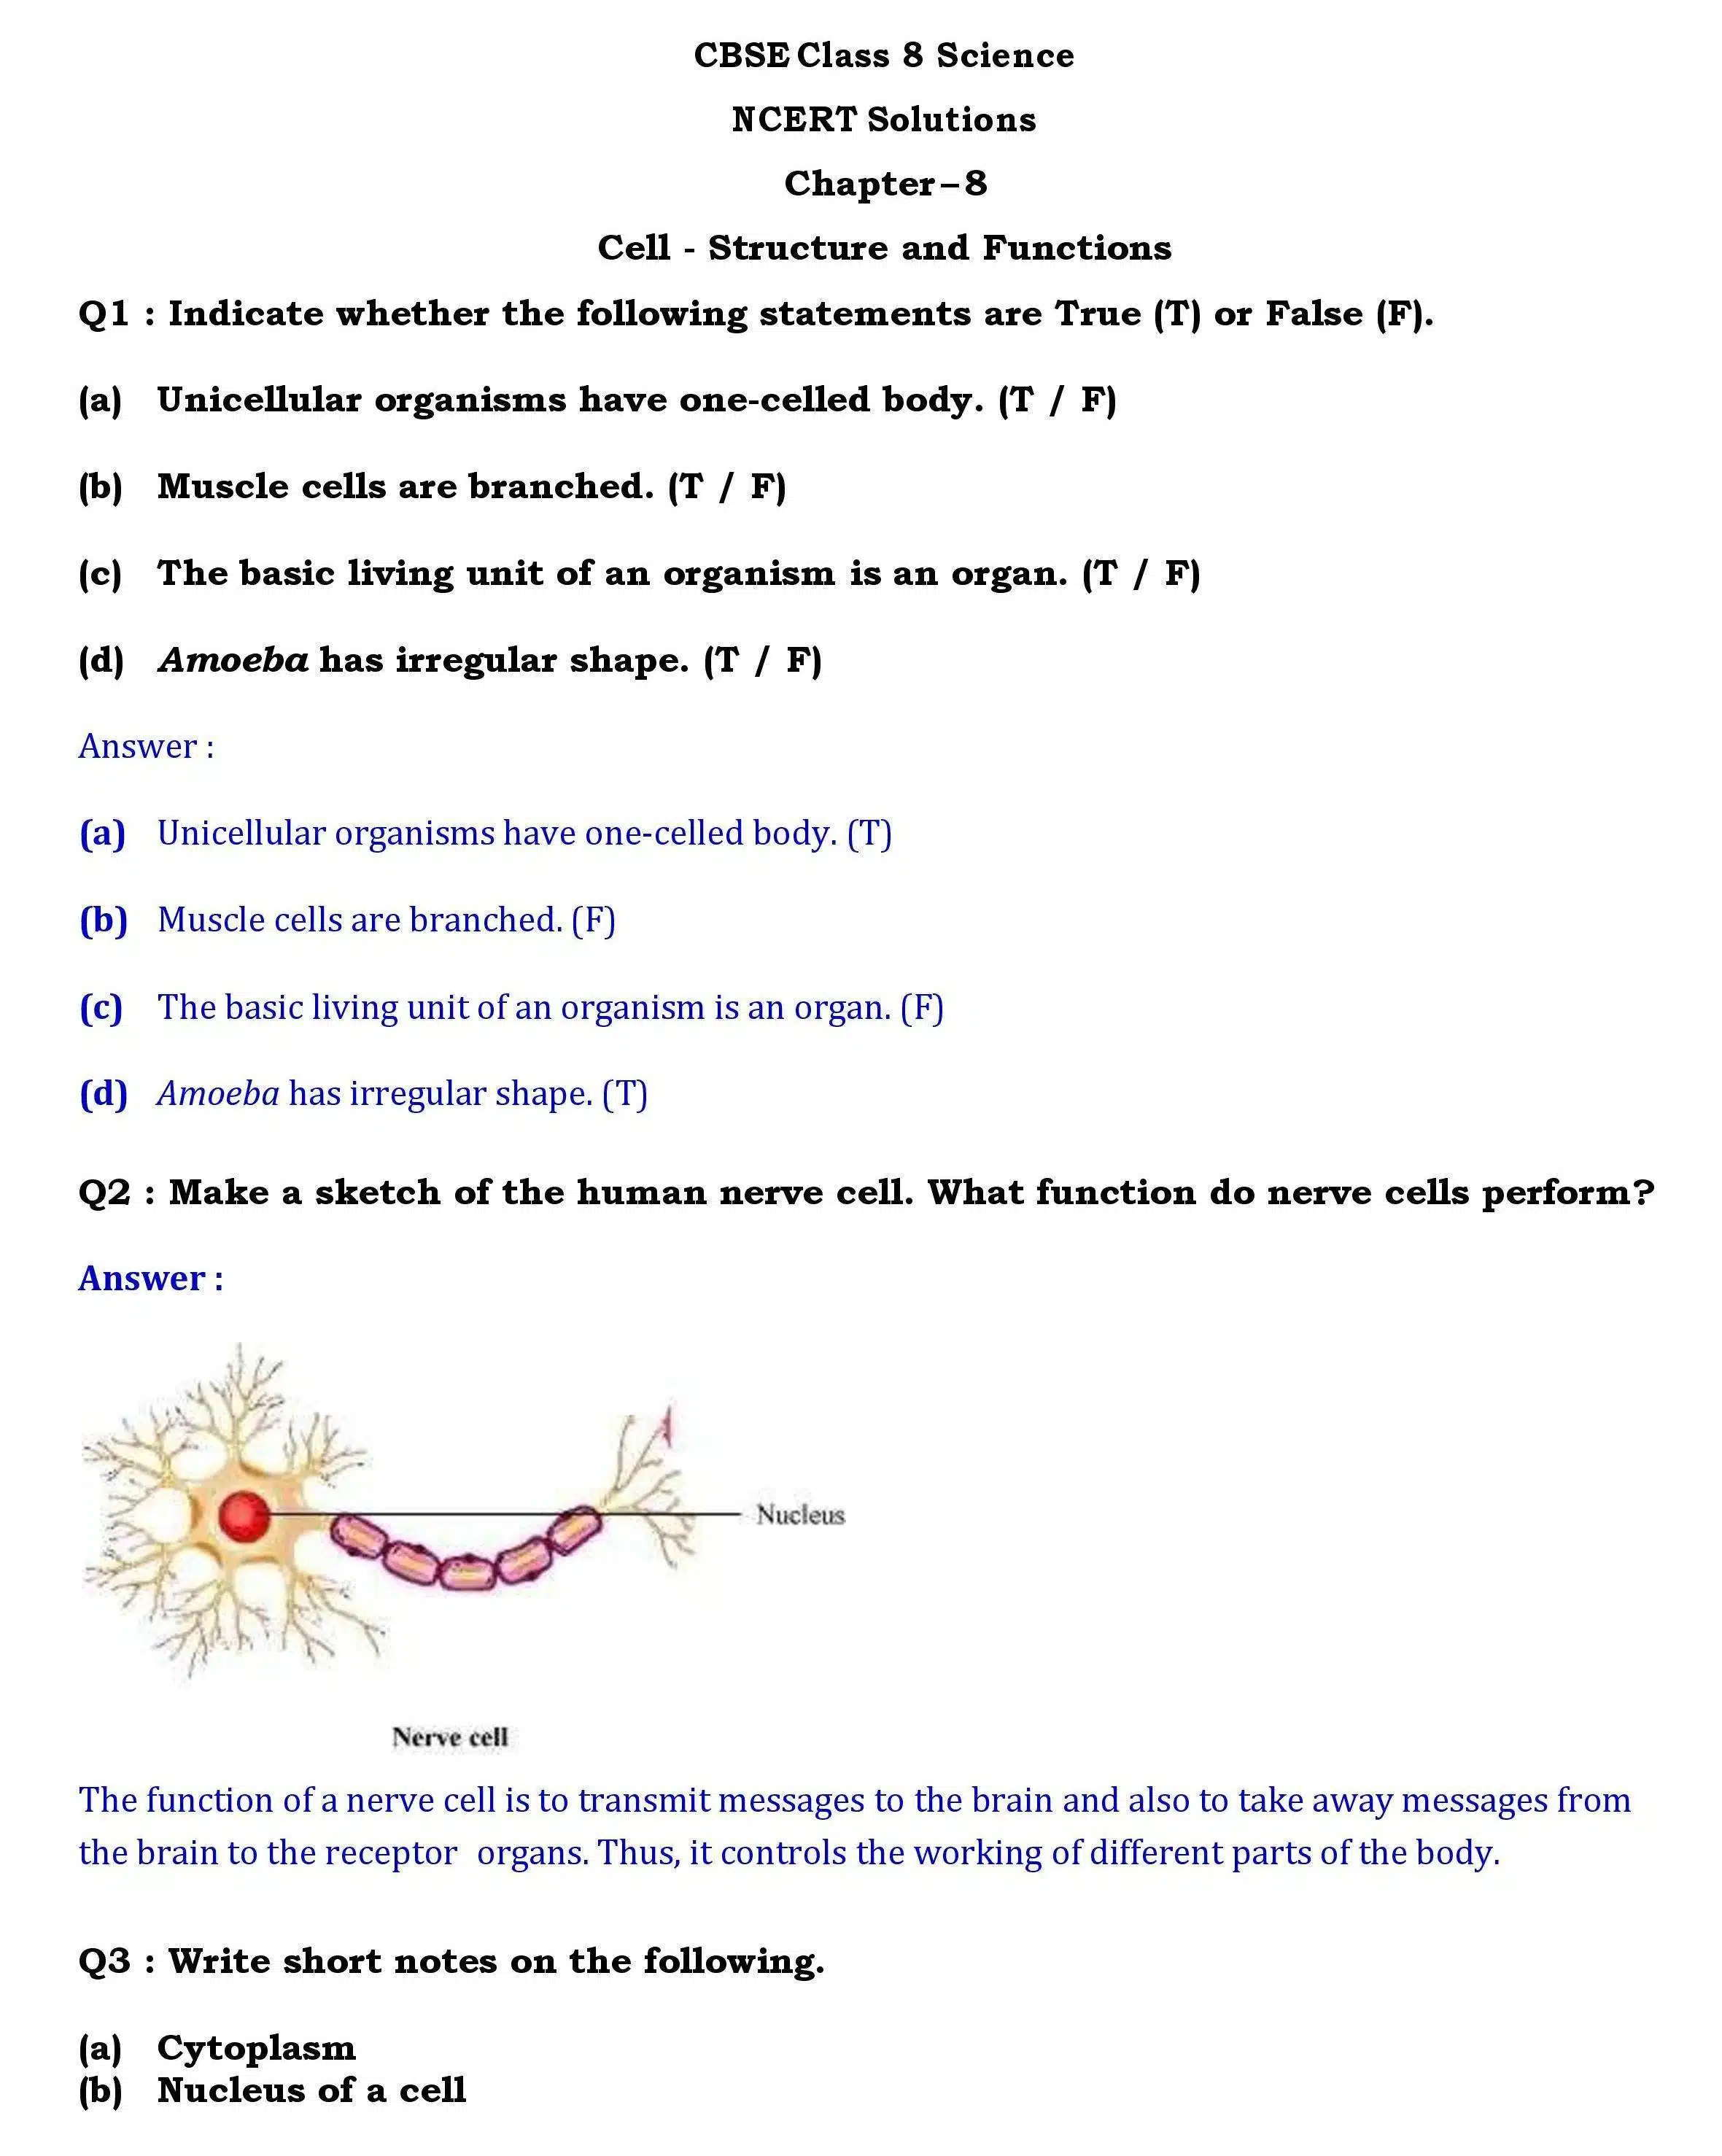 NCERT Solutions for Class 8 Science Chapter 8 page 001 scaled